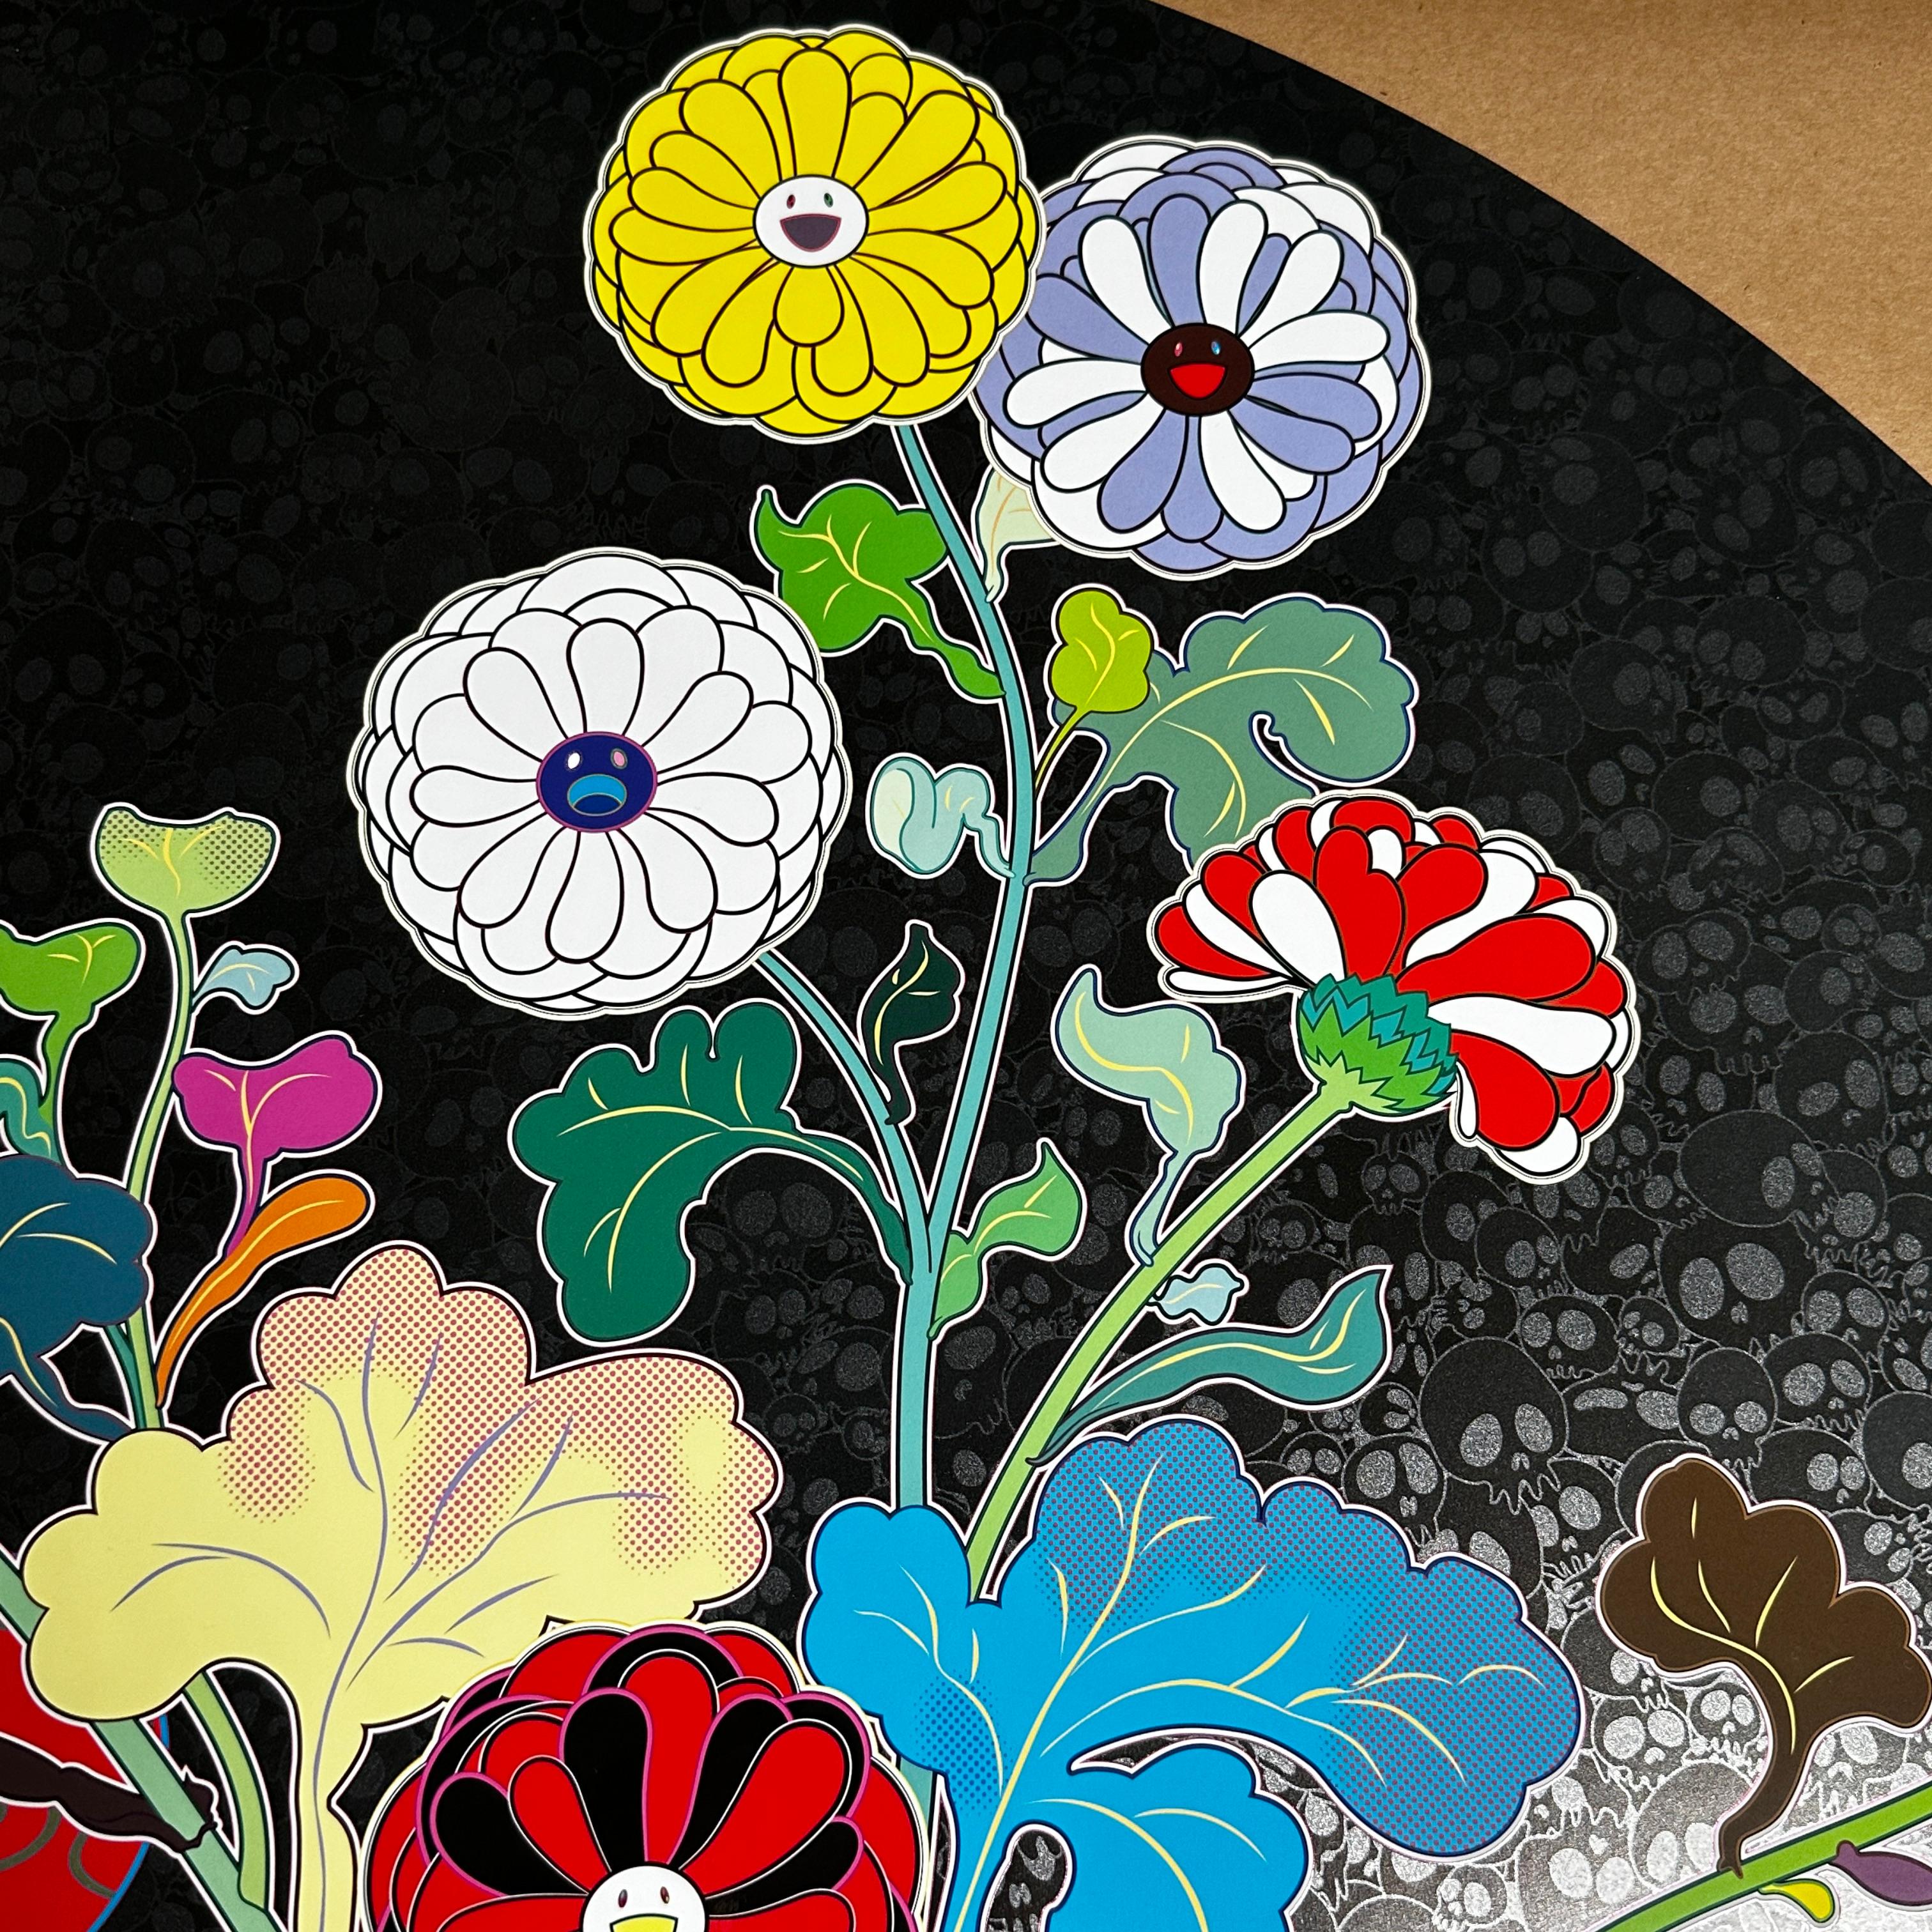 Flowers Blooming in the Isle of the Dead (Takashi Murakami, Tokyo, Flowers) 1